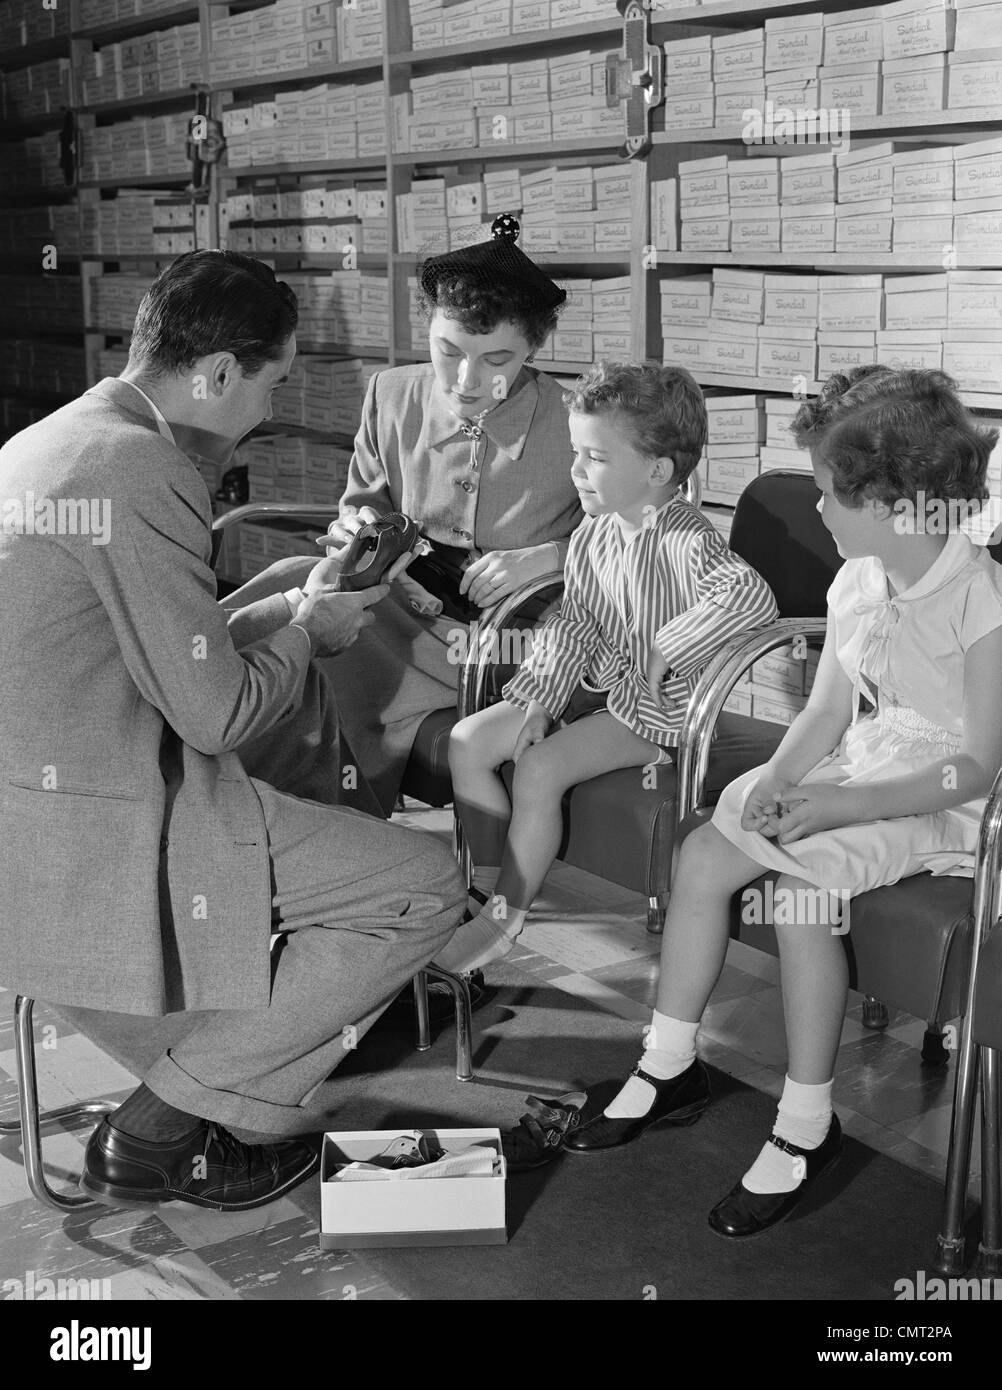 1950s FAMILY MOTHER TWO CHILDREN IN SHOE STORE TRYING NEW SHOES HELPED BY SALESMAN Stock Photo